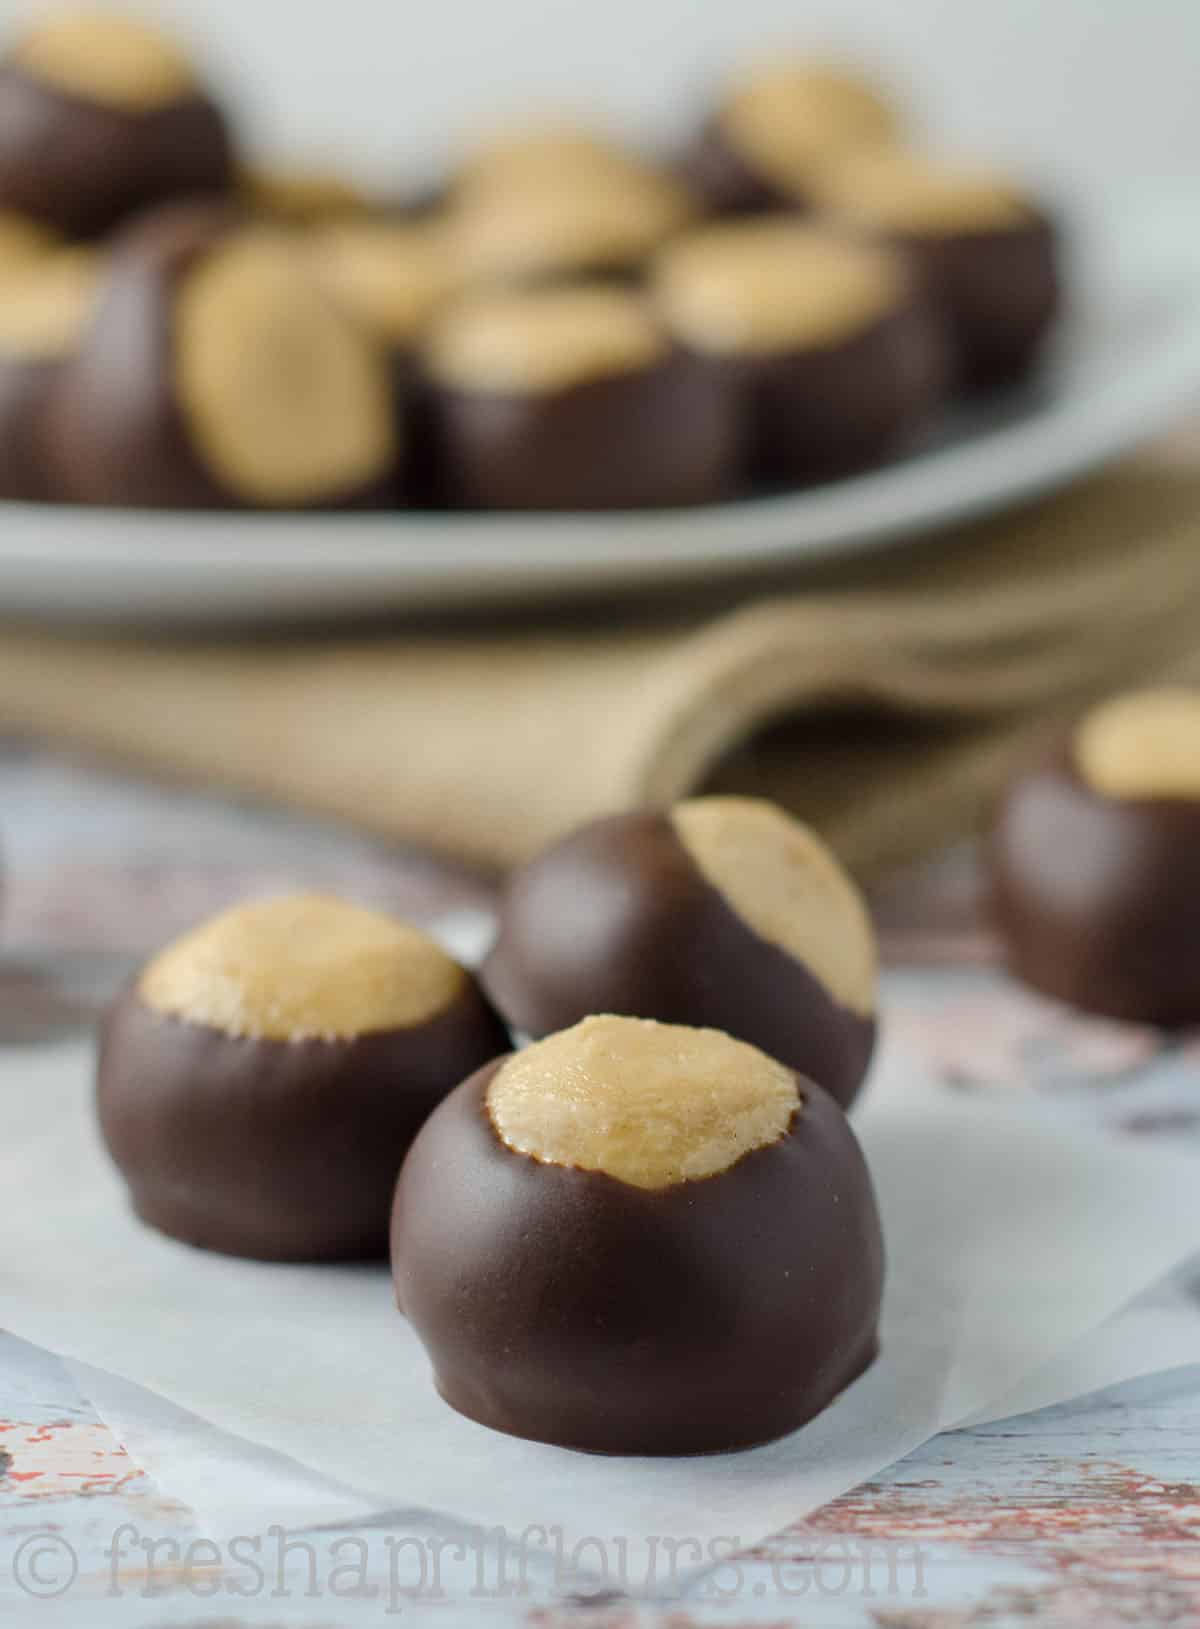 buckeye candies on a parchment square